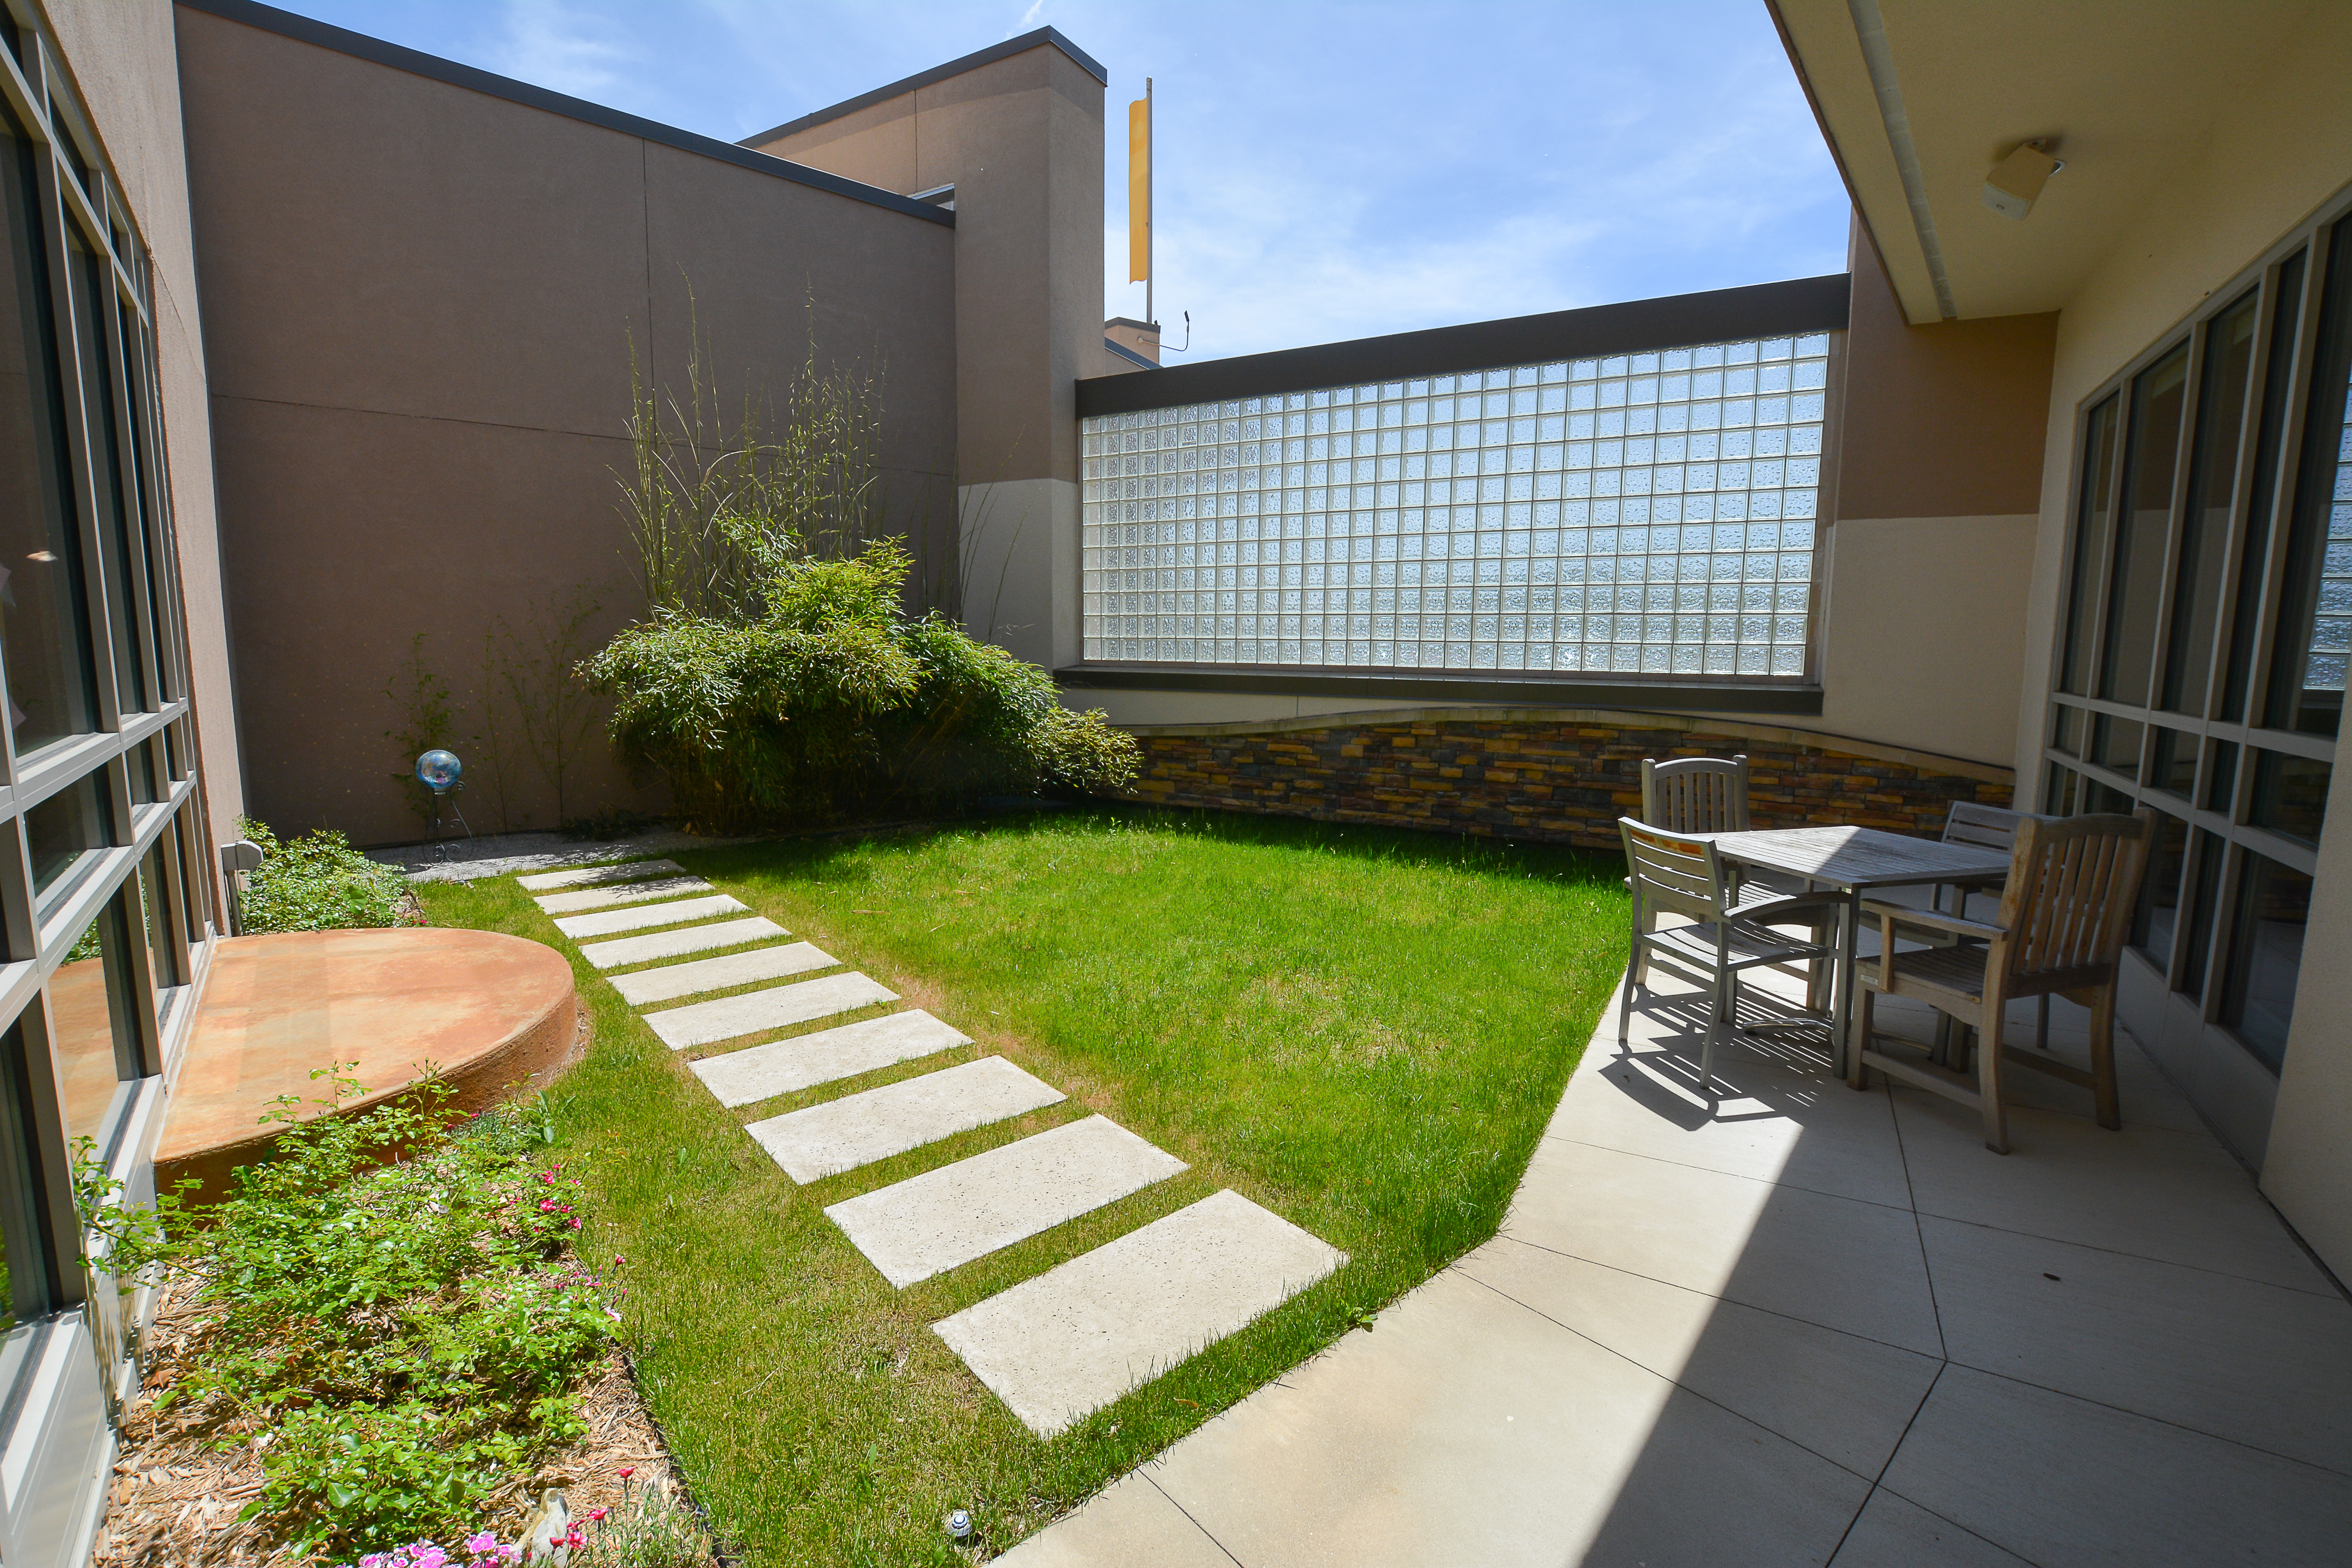 REFLECT is the smaller of our two courtyards. Enjoy casual seating for lunch, or reading. This courtyard is located adjacent to, and accessible from, DISCOVER.